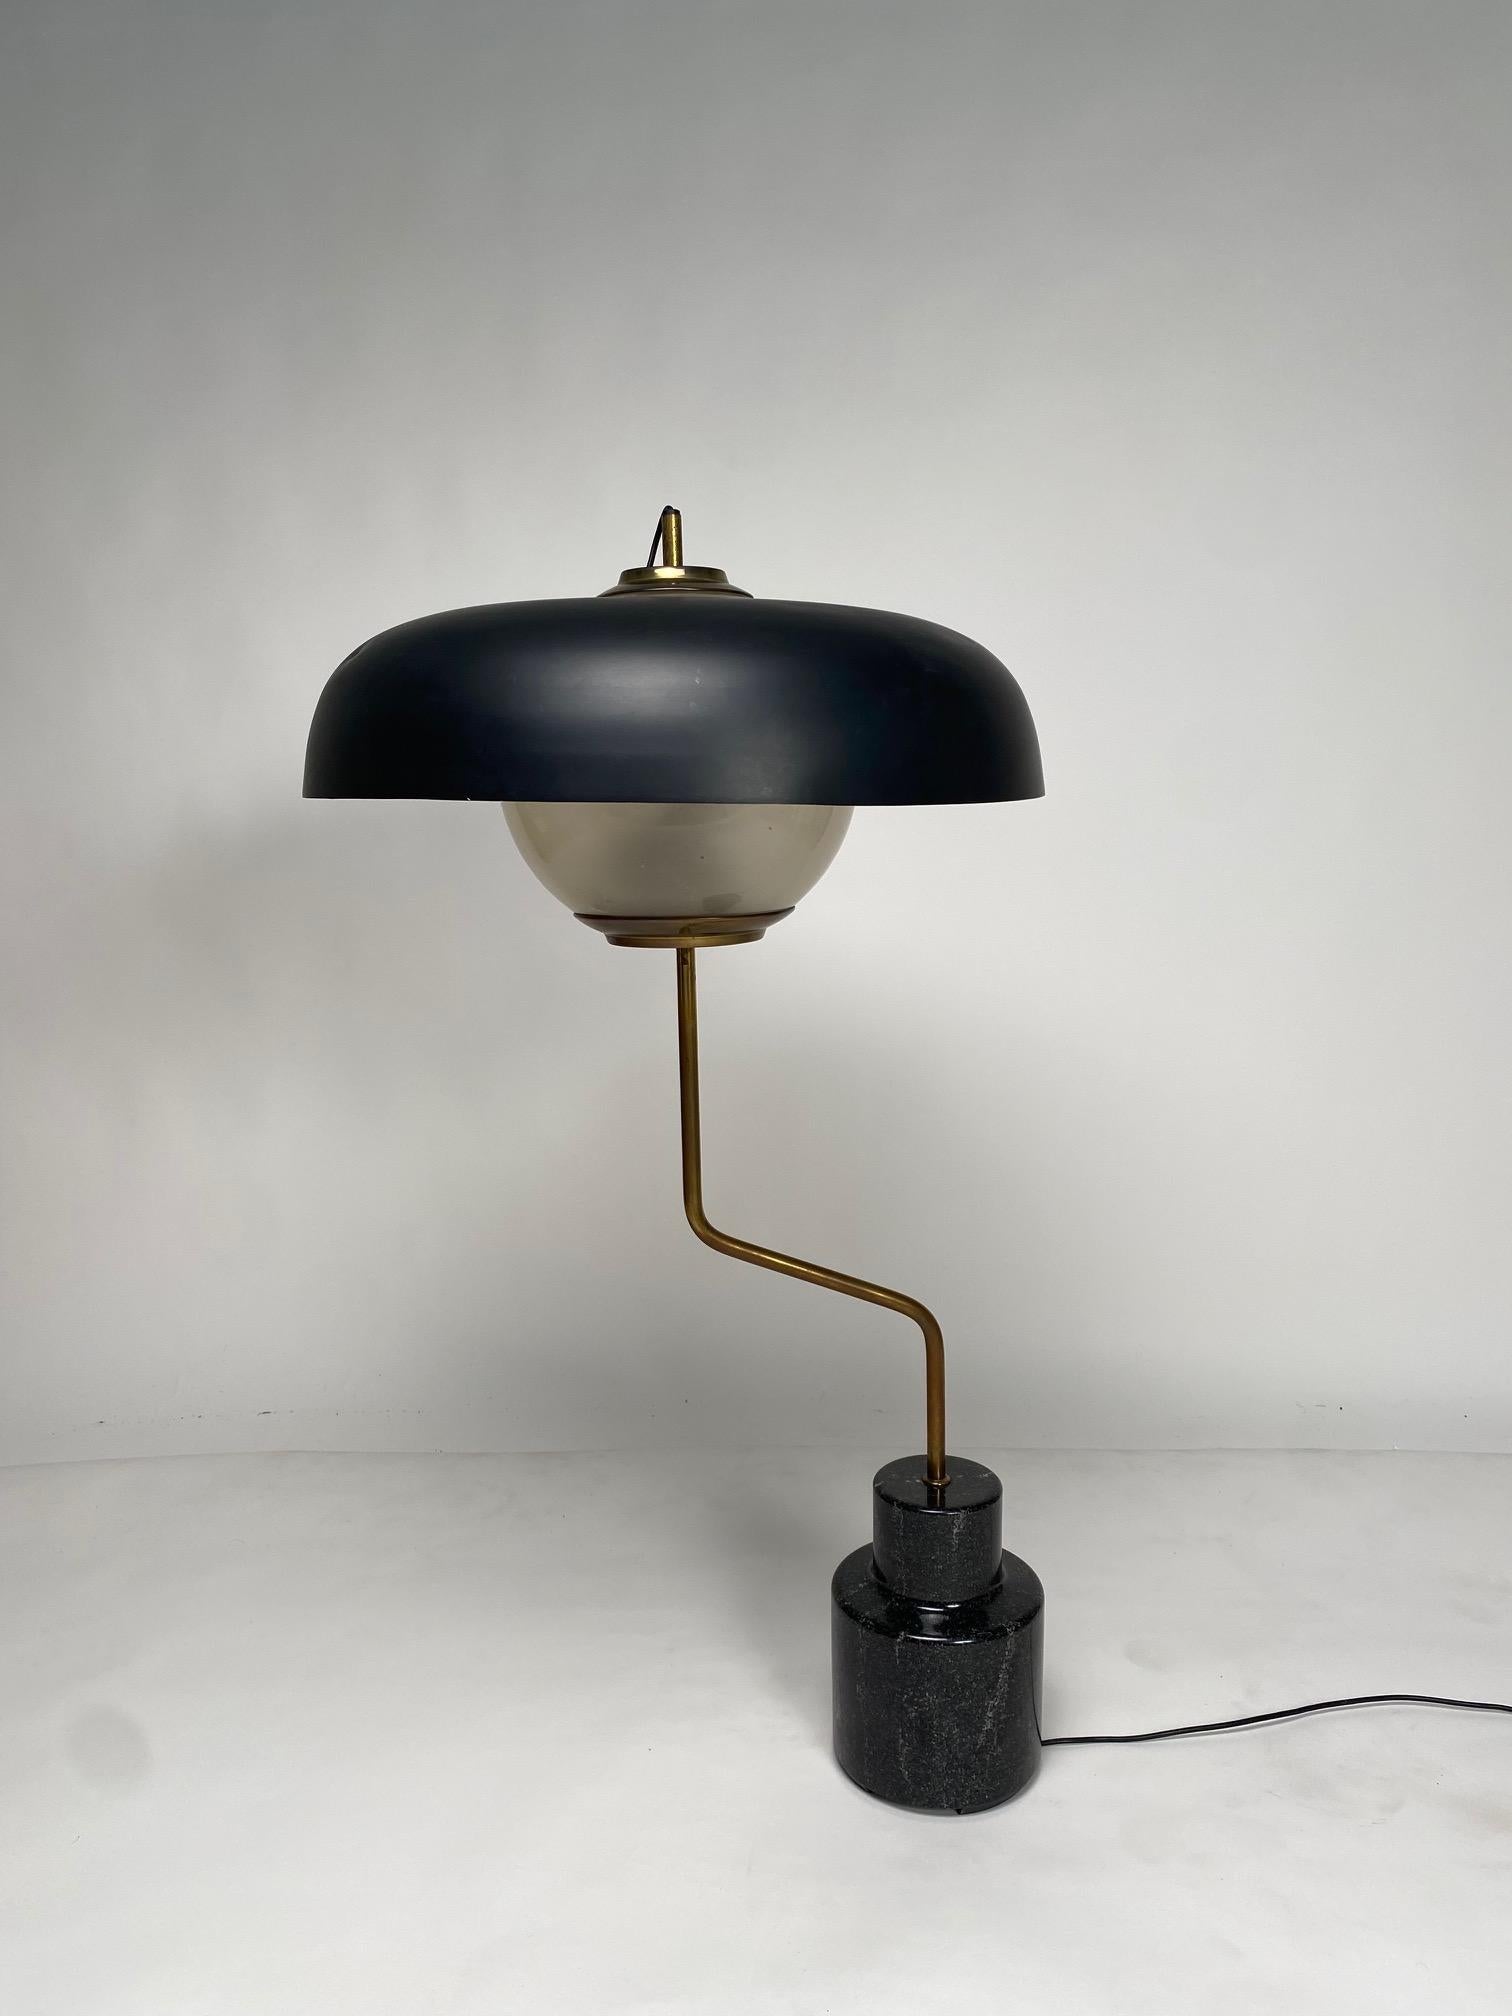 Luigi Caccia Dominioni (1913 - 2016), Rare and monumental Mikado table lamp made for Azucena, Italy, circa 1963

  It is one of the rarest and most scenic lamps by the famous Italian architect and designer Gardella. An elegant chrome-plated steel